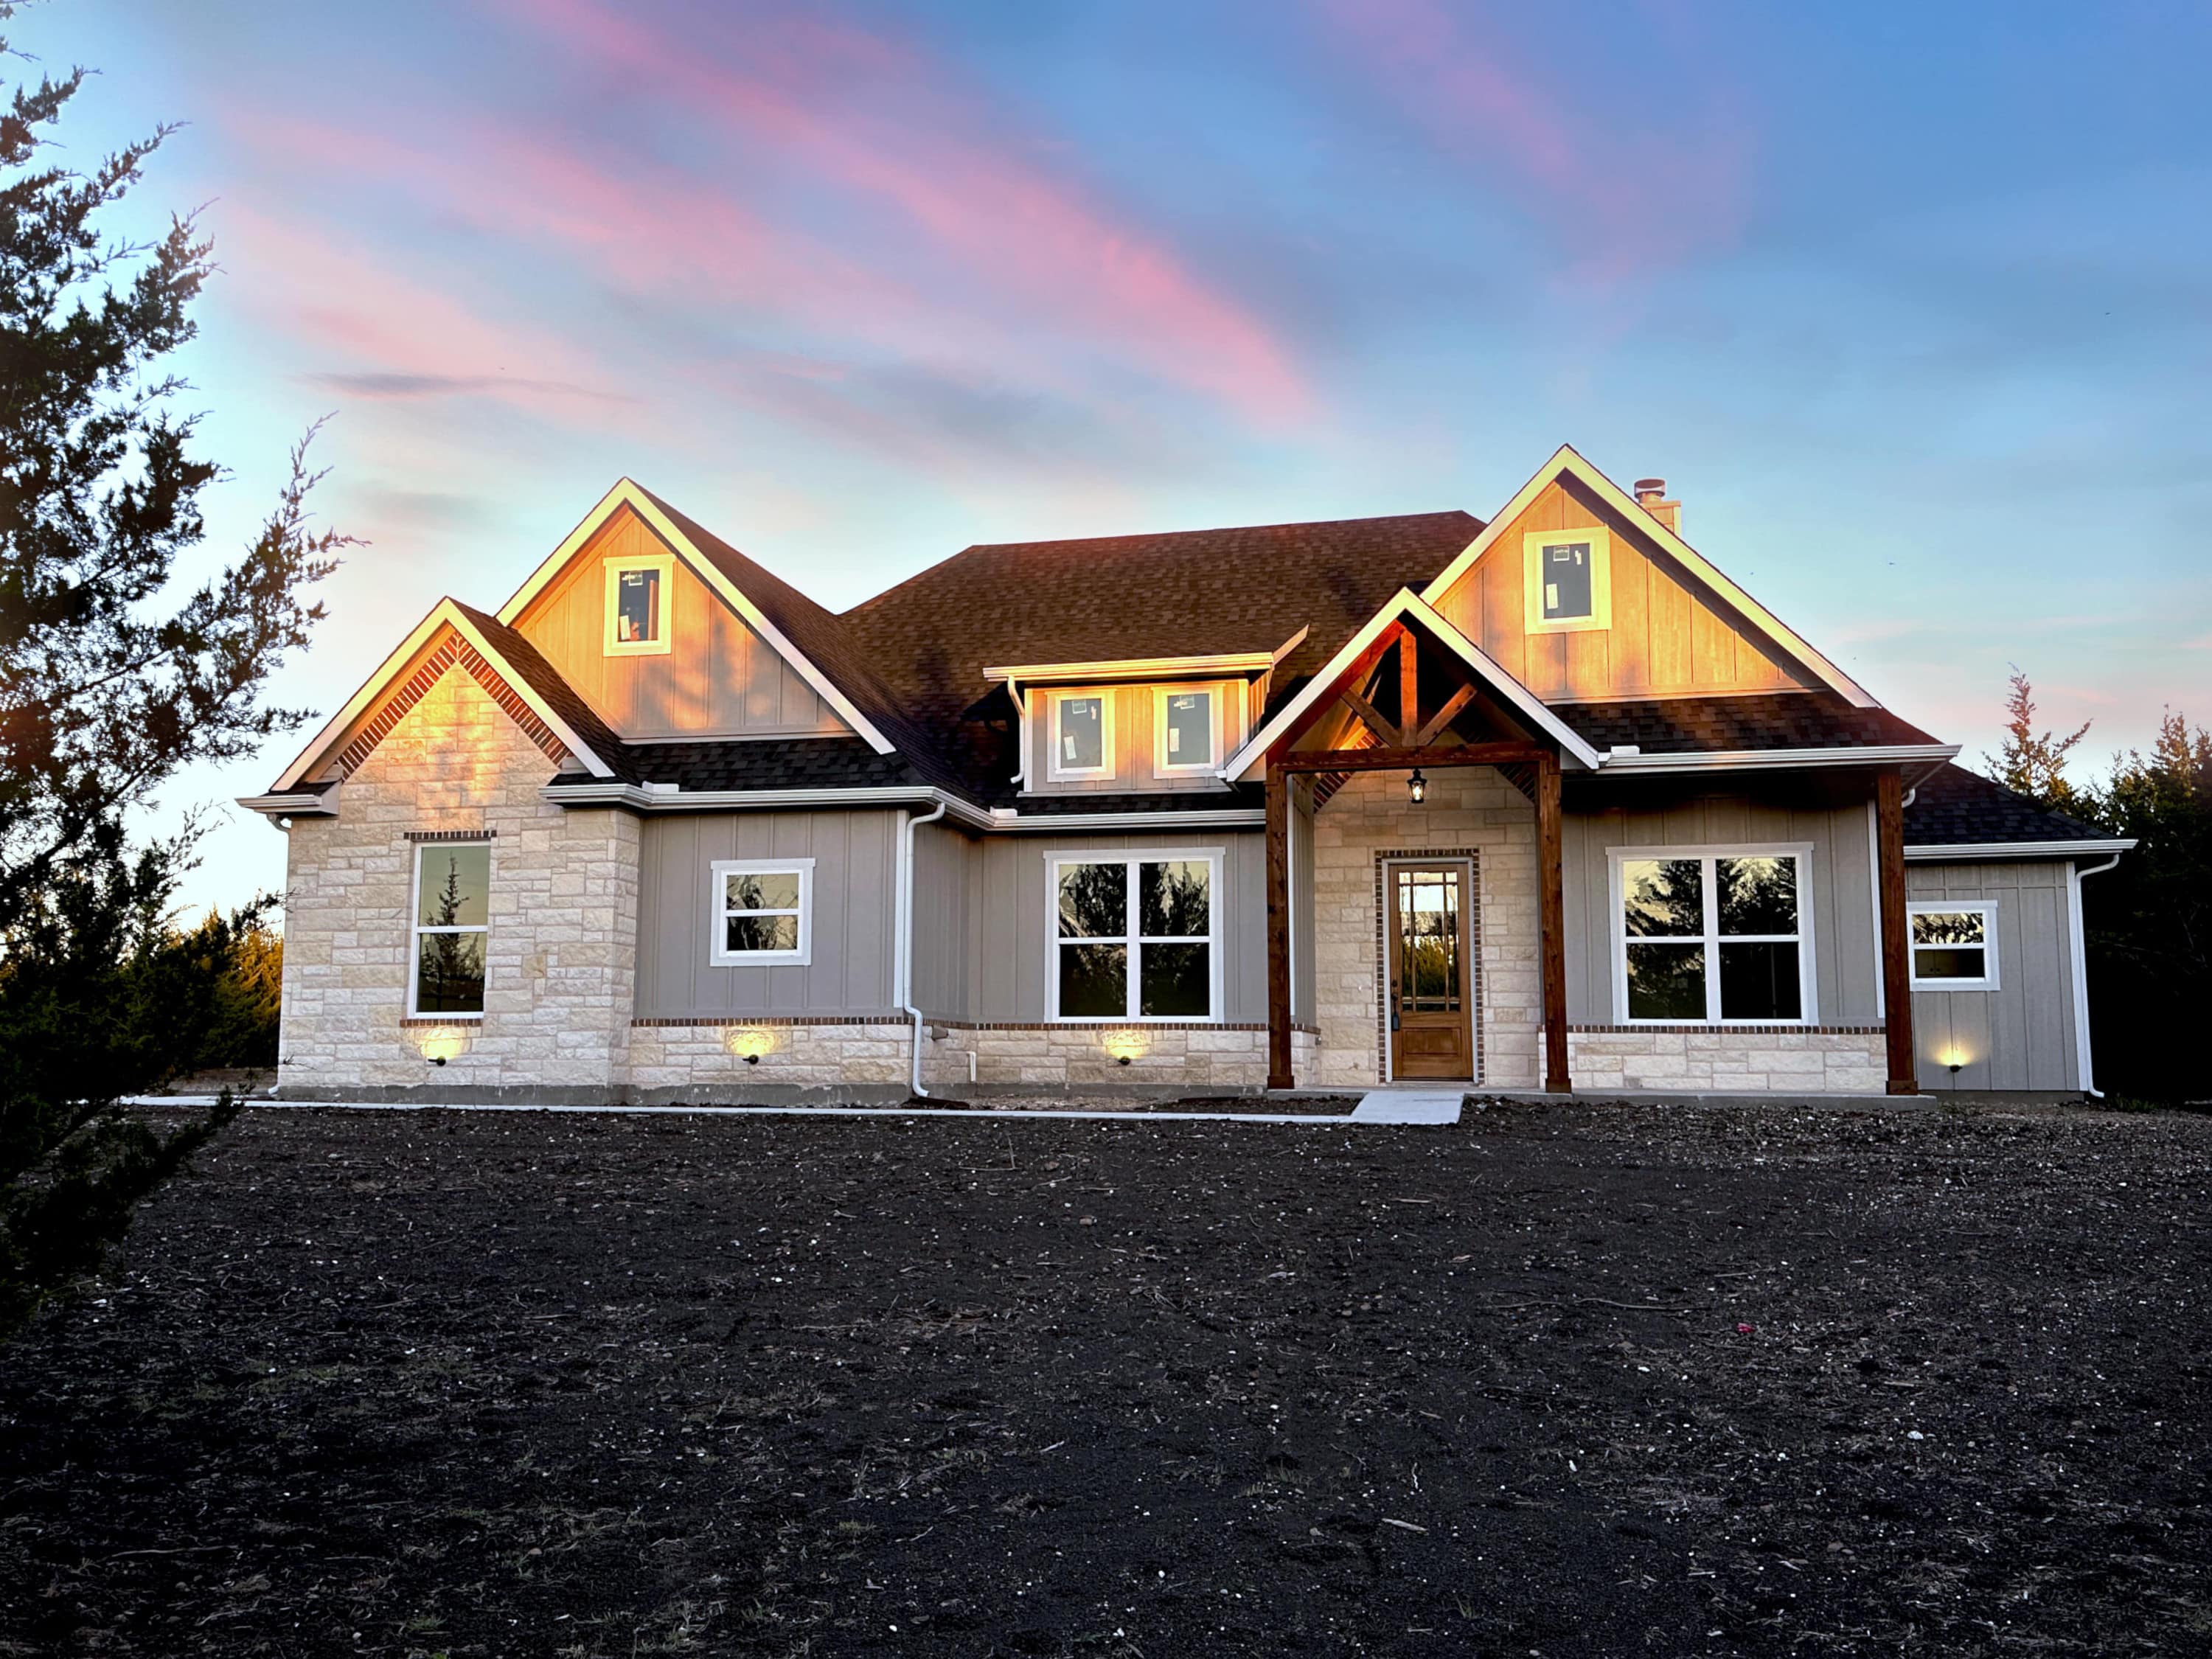 Beautiful new construction modern farmhouse just listed by Hillary Leutwyler, Agent.